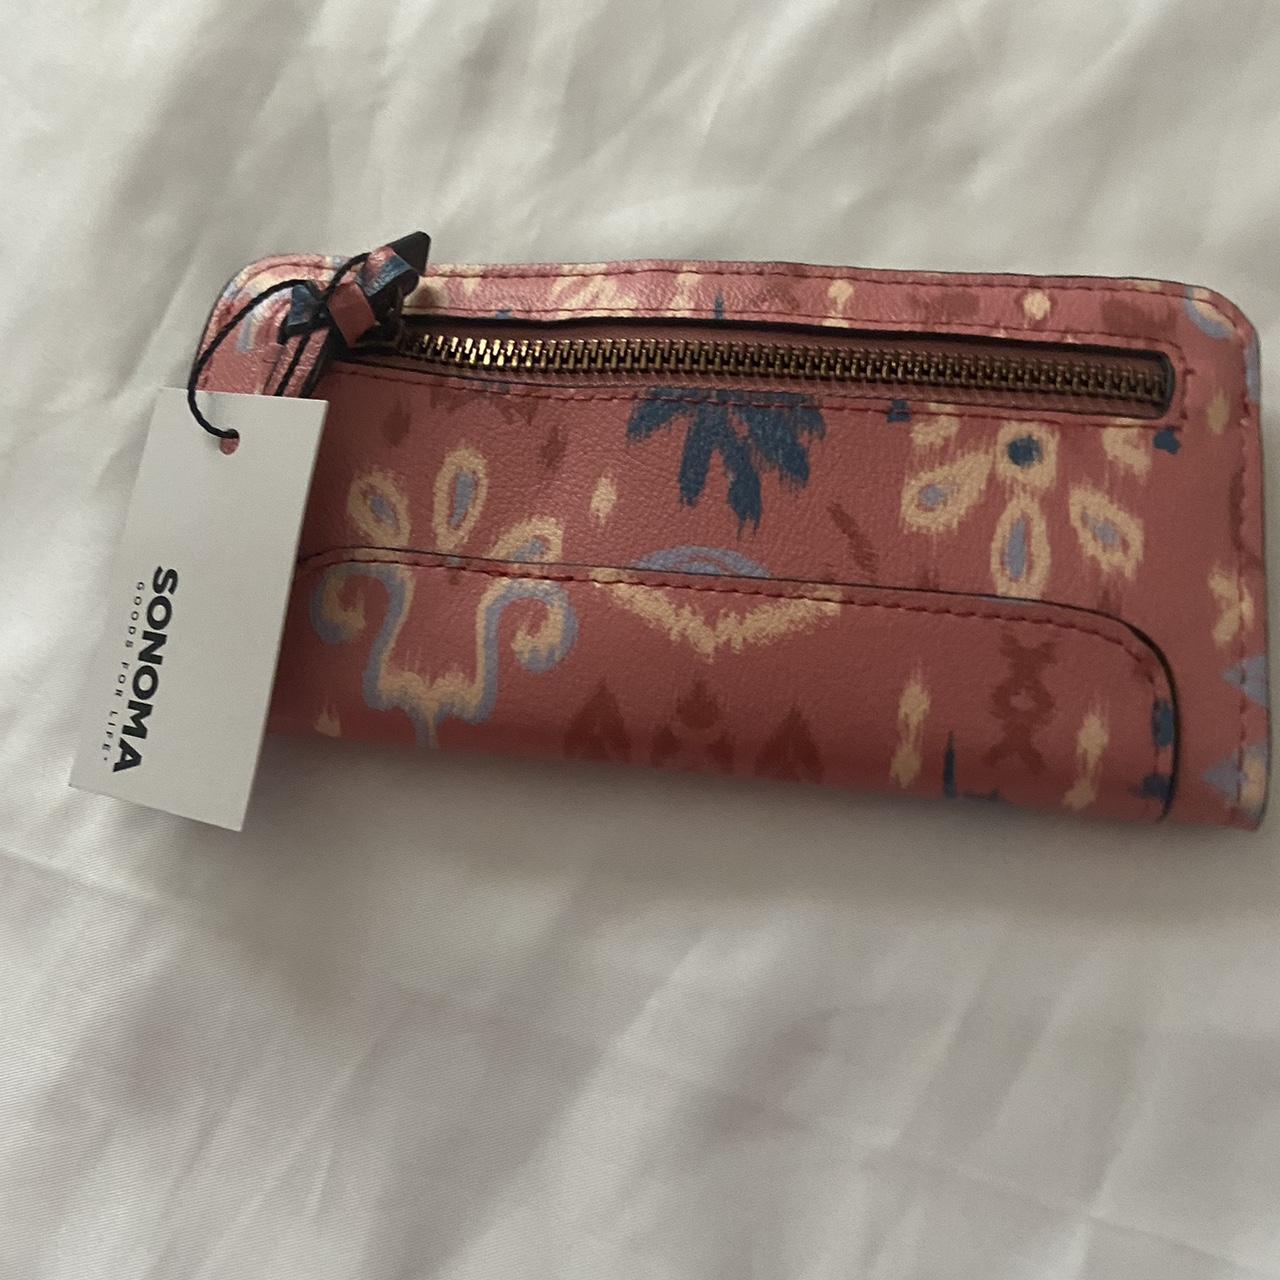 New with tags Sonoma wallet with zip coin pocket,... - Depop